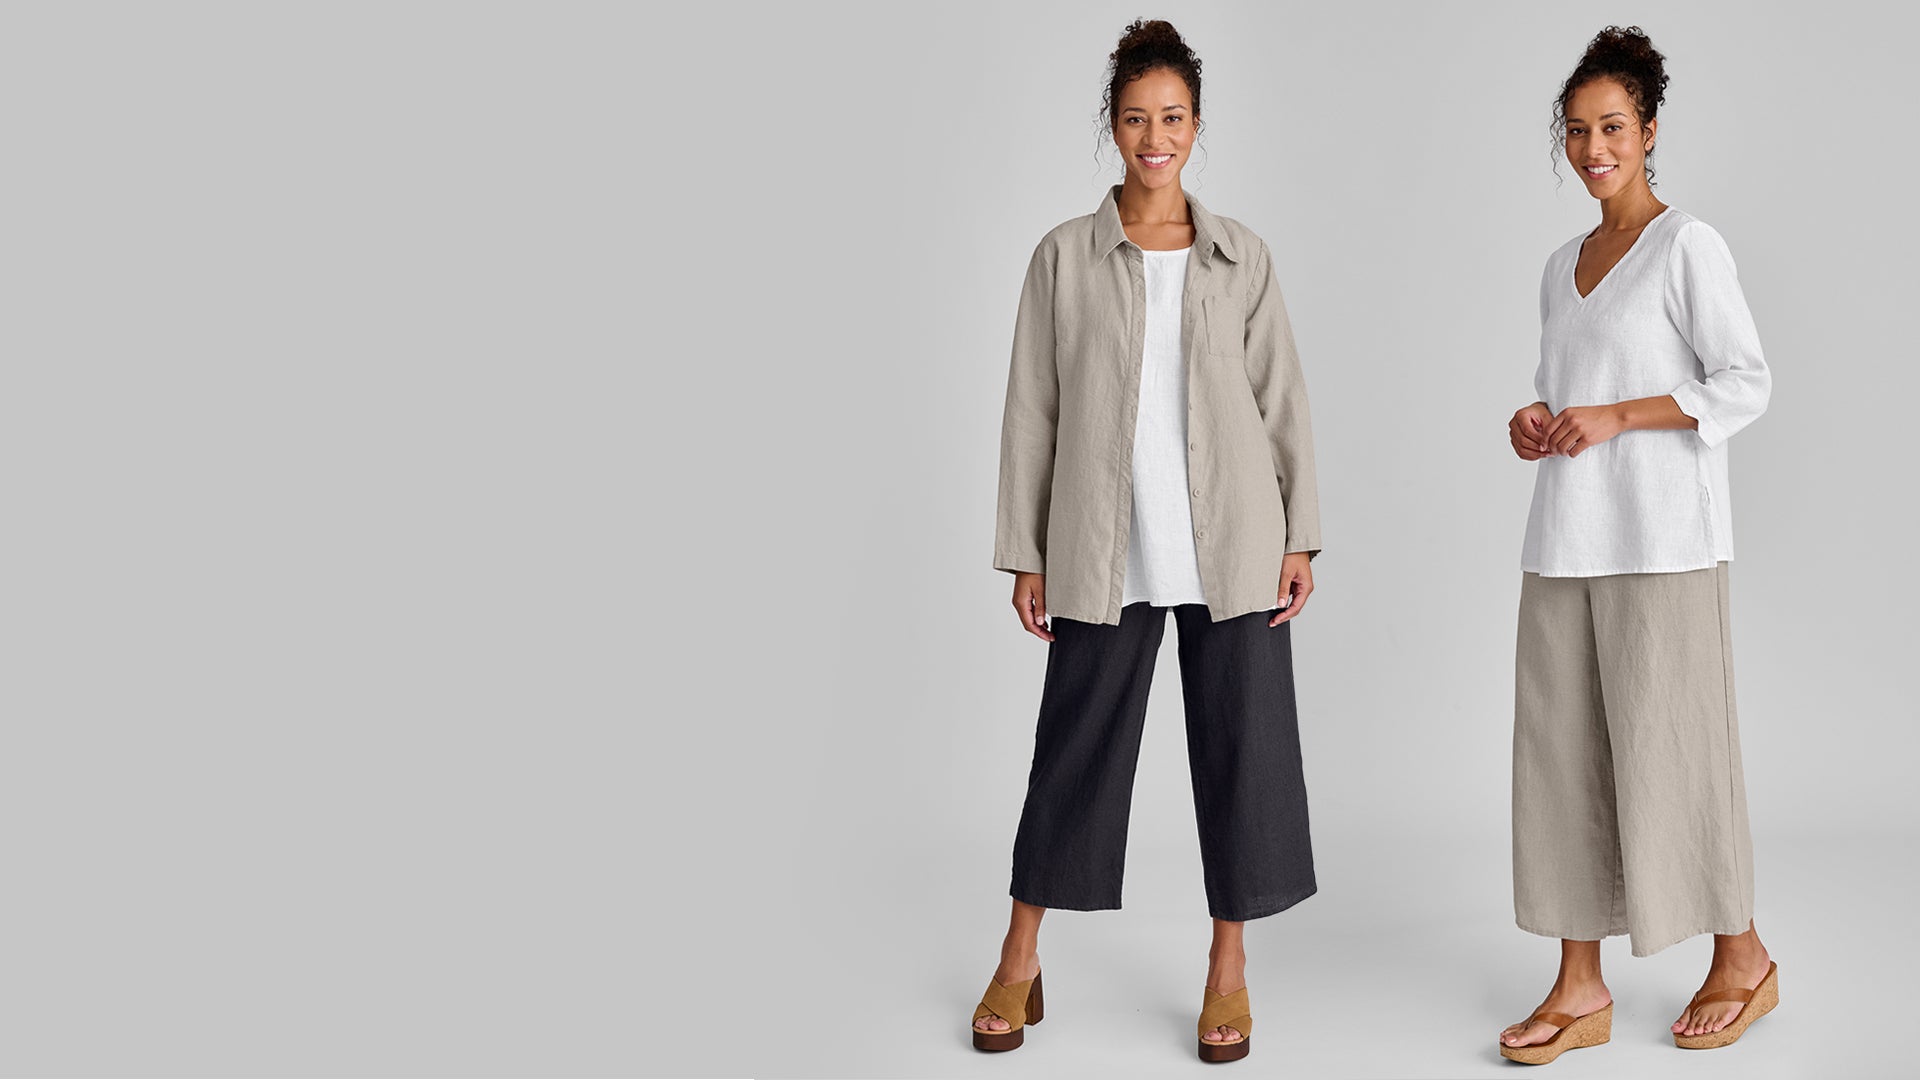 FLAX - Women's linen clothing collection capsule wardrobe